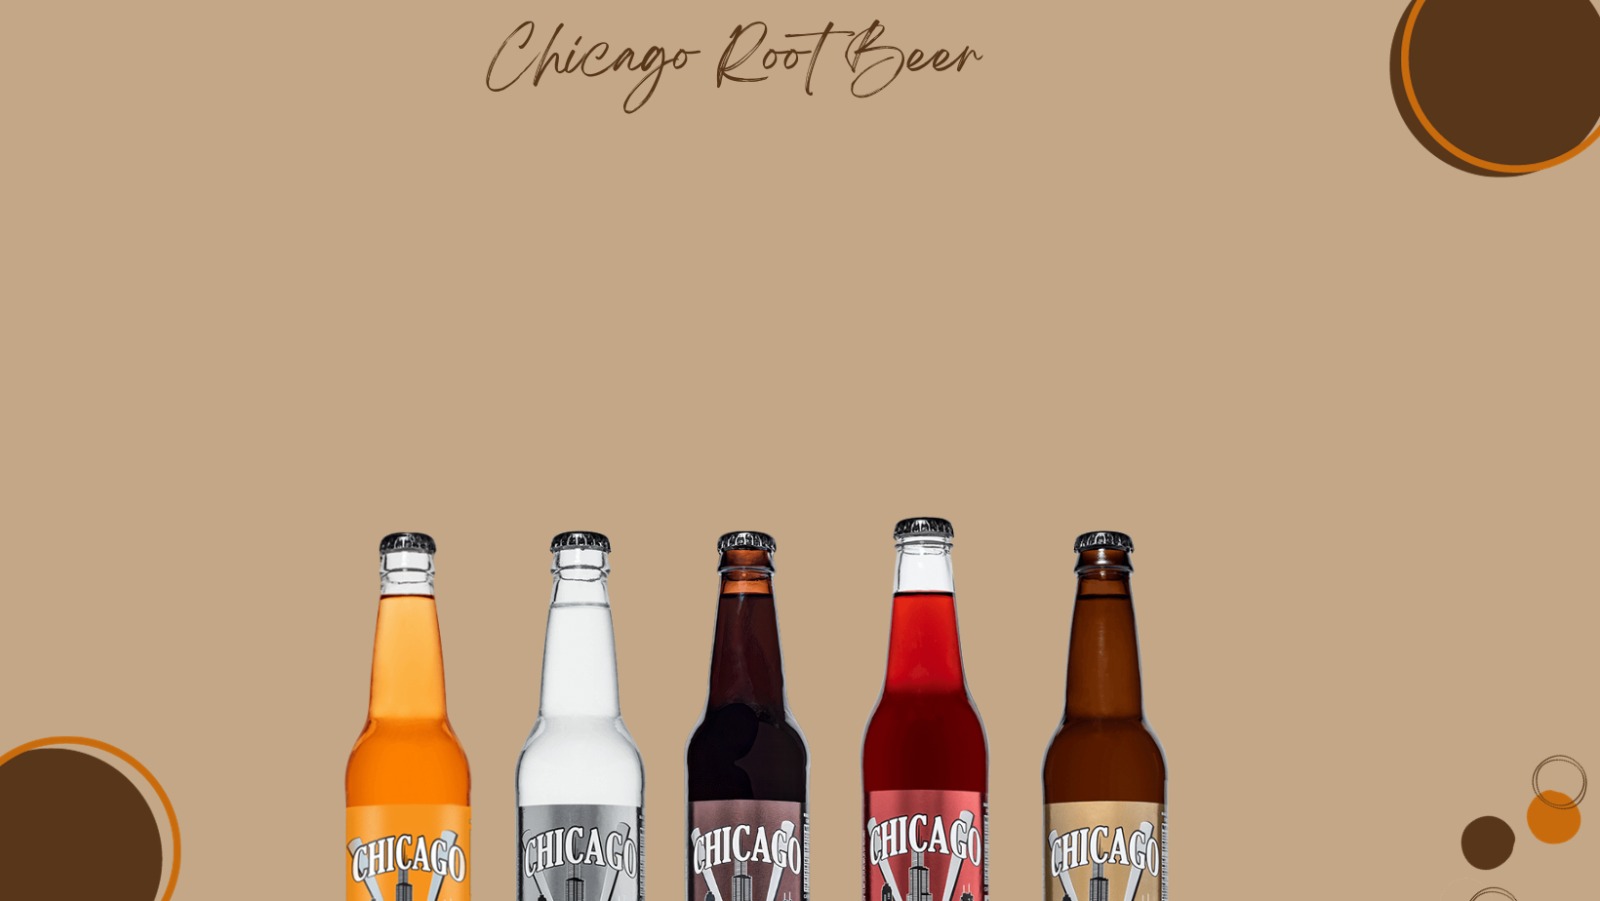 #1Hand crafted Flavored Sodas, Hand Craft Sodas at Chicago Rootbeer